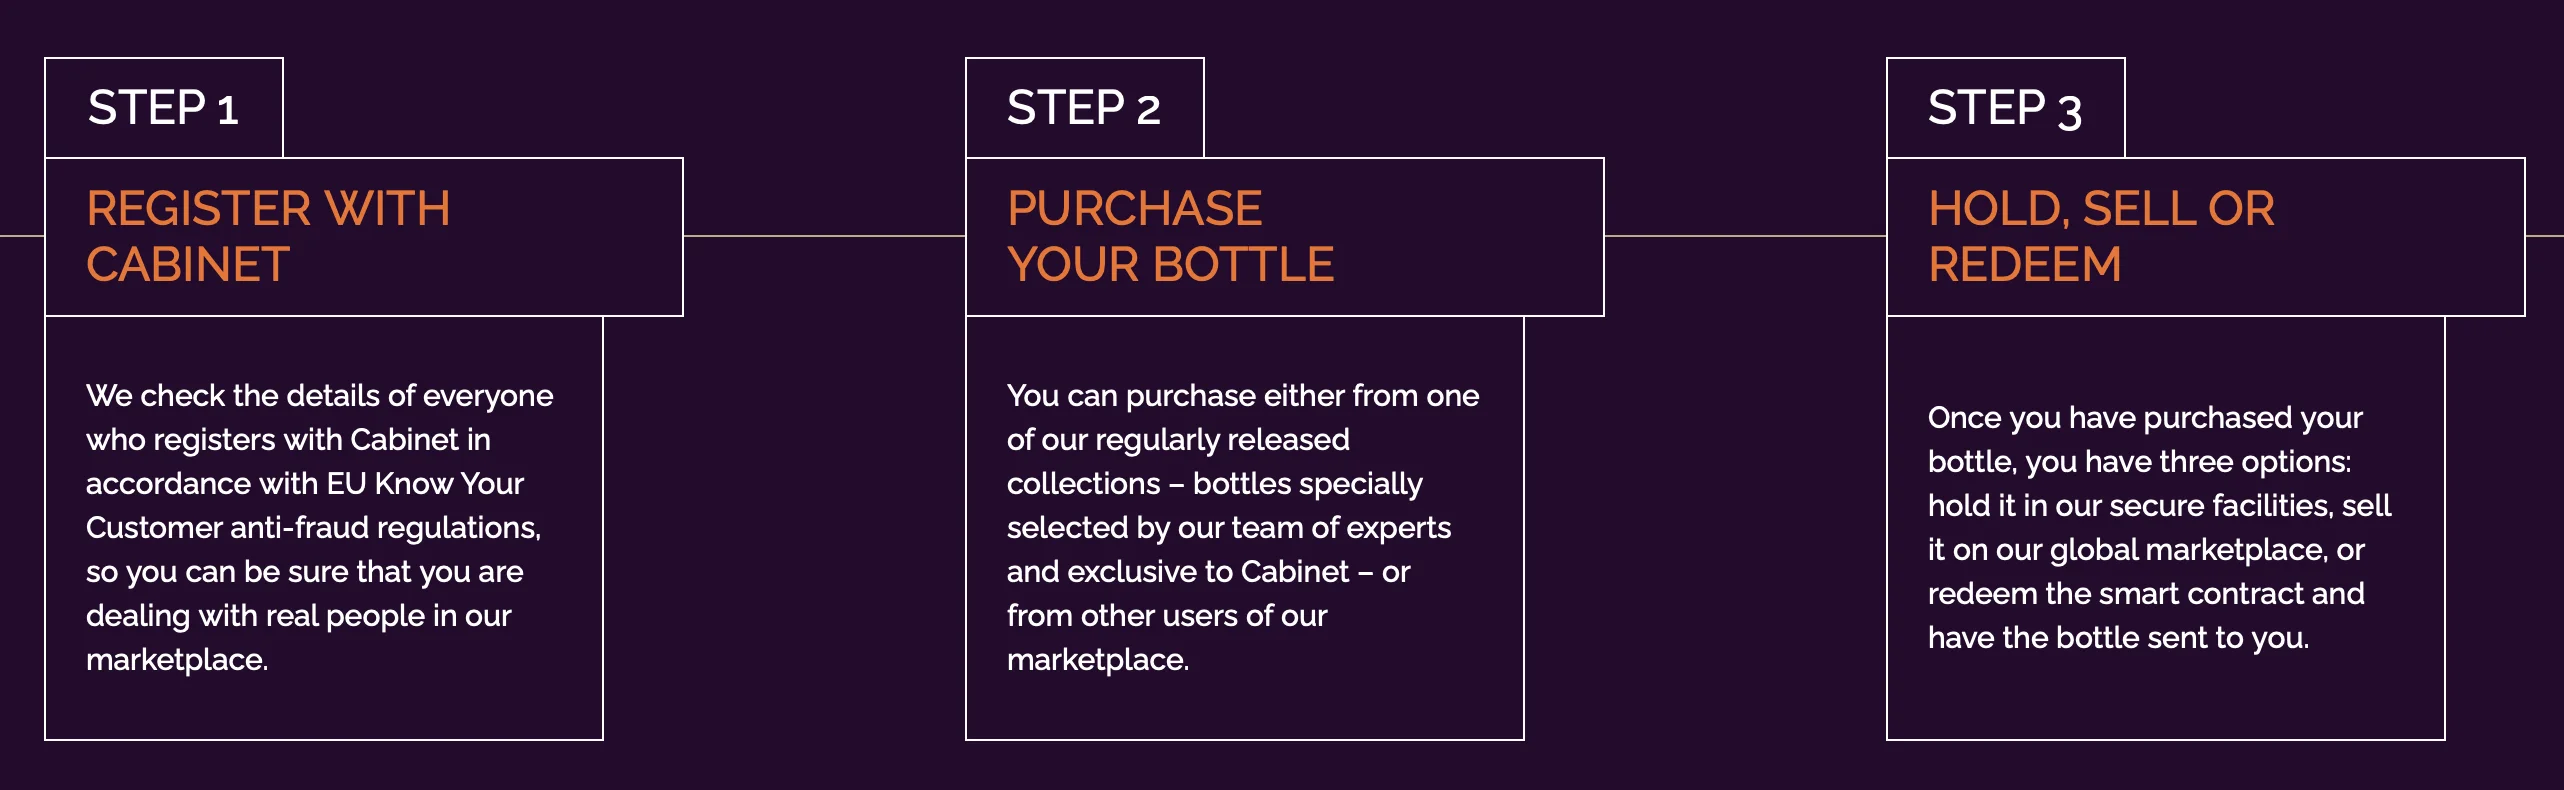 Steps to hold your bottle